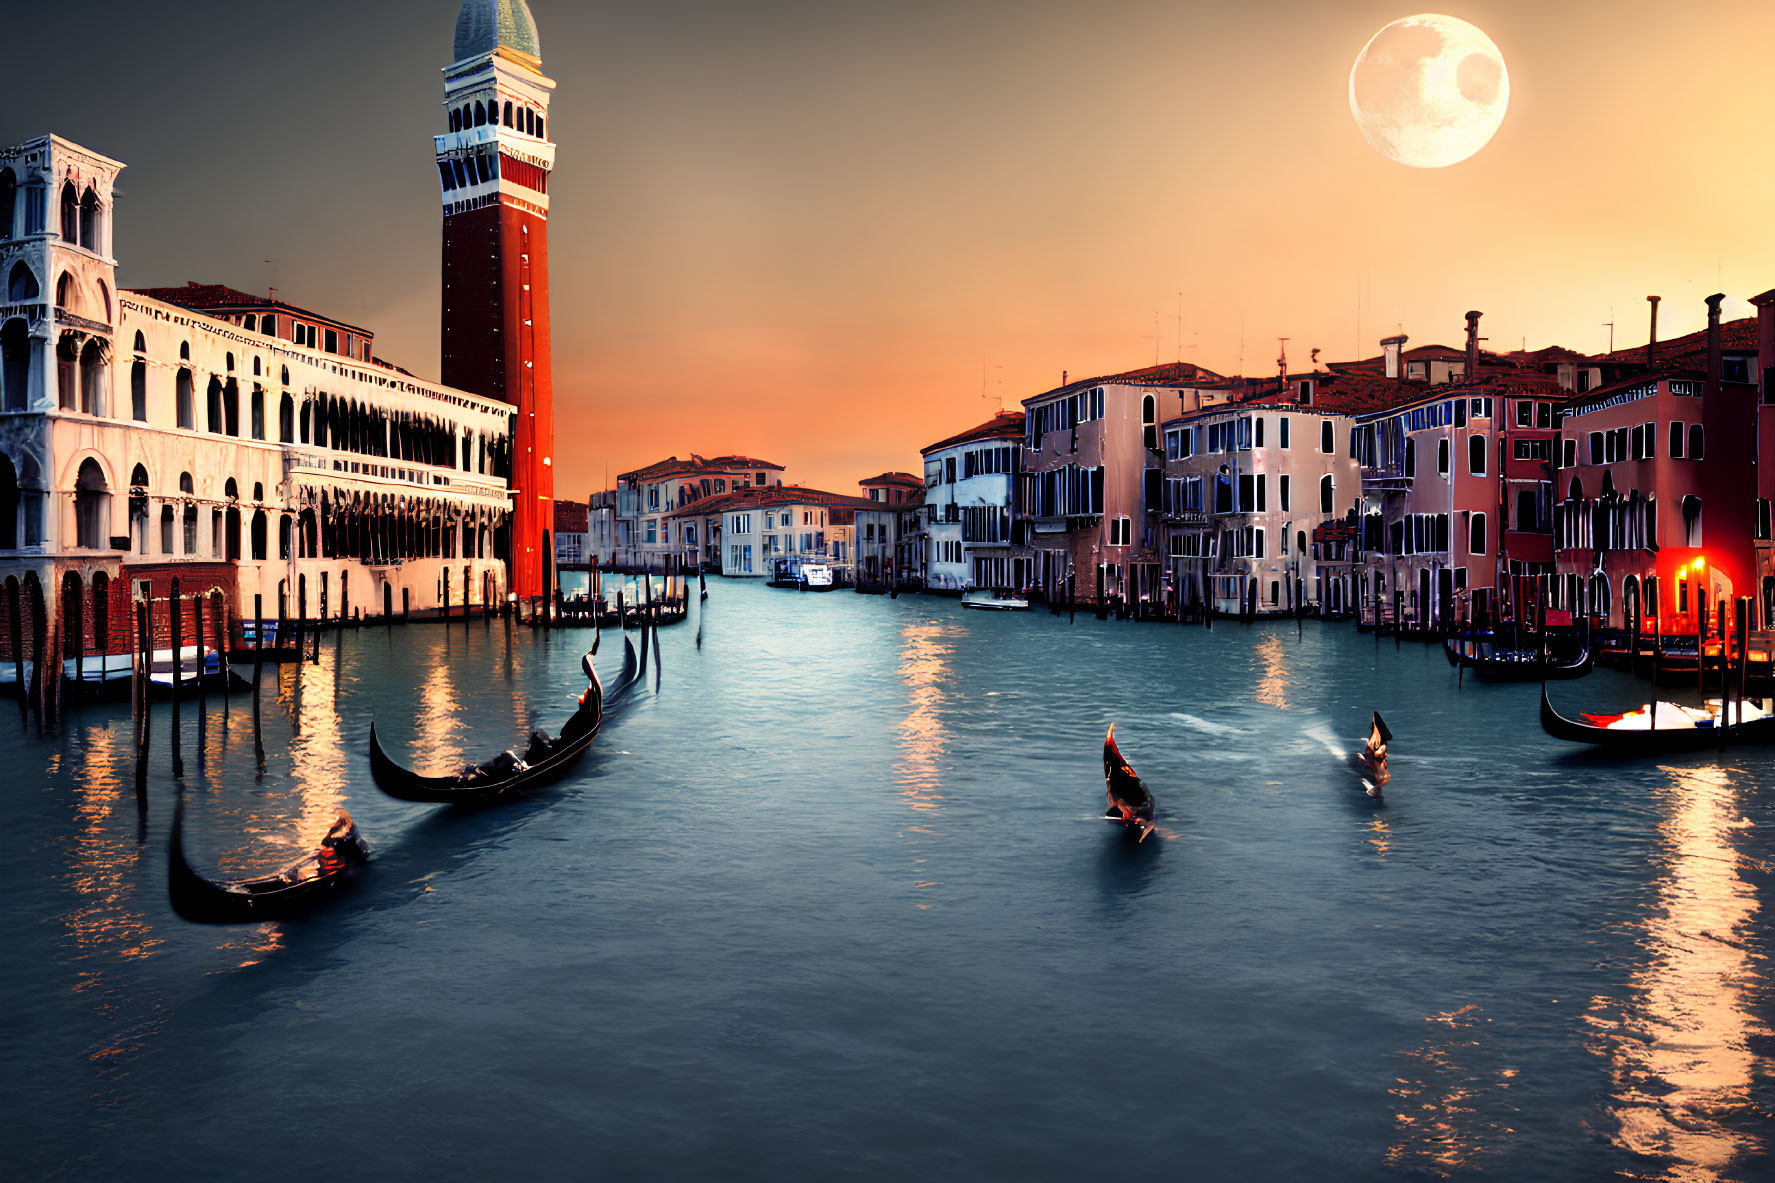 Grand Canal Venice sunset with gondolas, historic buildings, and oversized moon